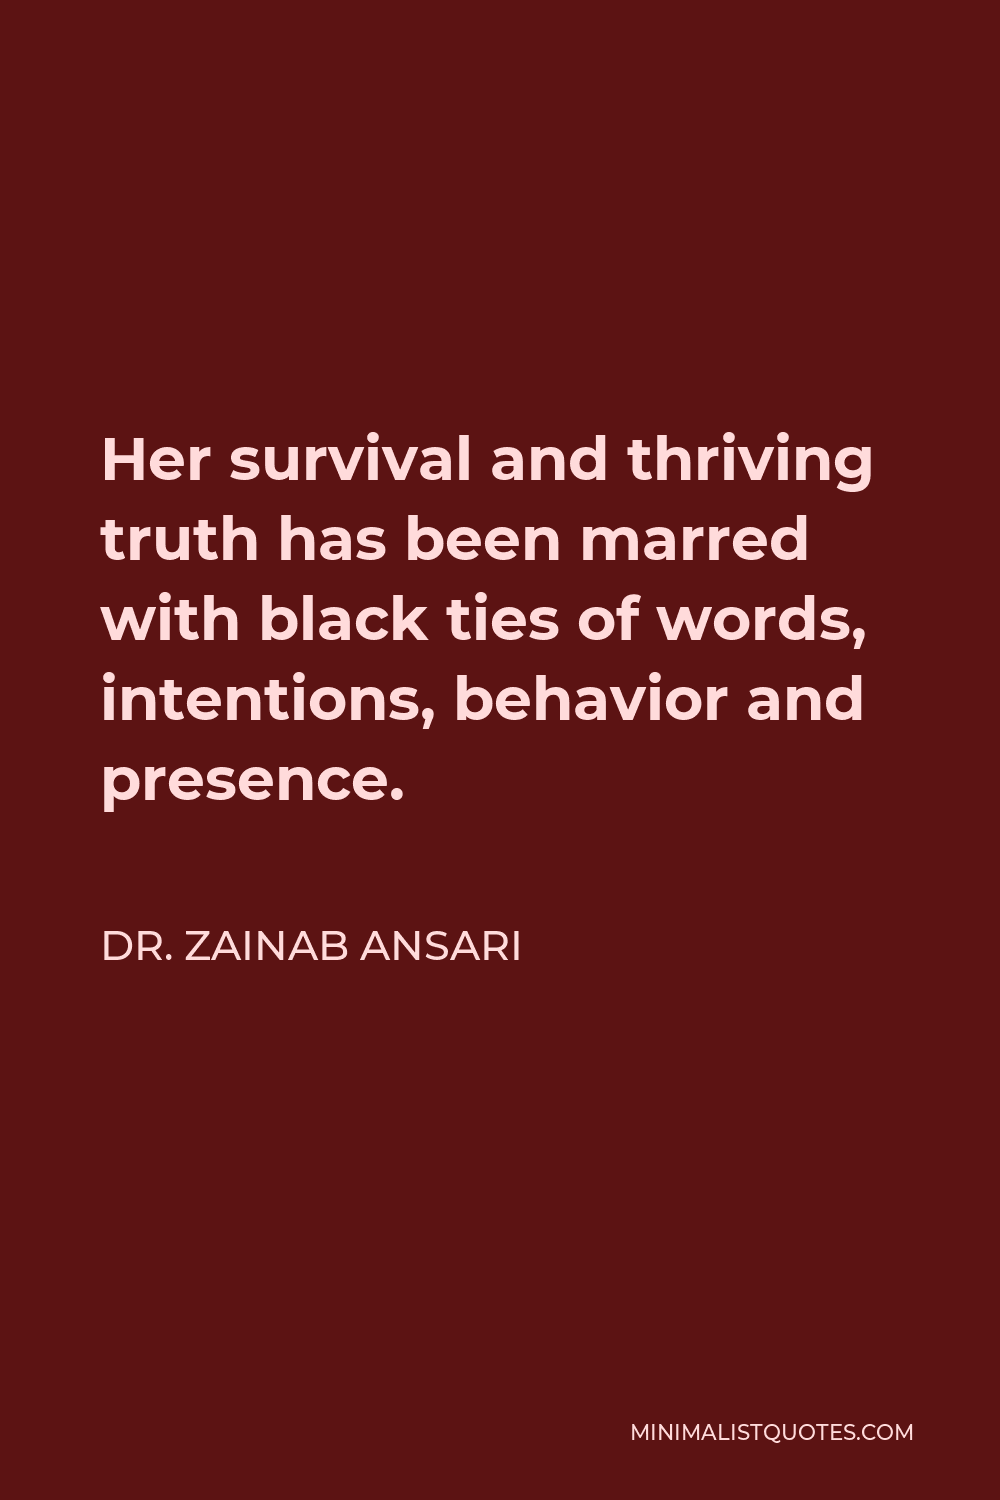 Dr. Zainab Ansari Quote - Her survival and thriving truth has been marred with black ties of words, intentions, behavior and presence.